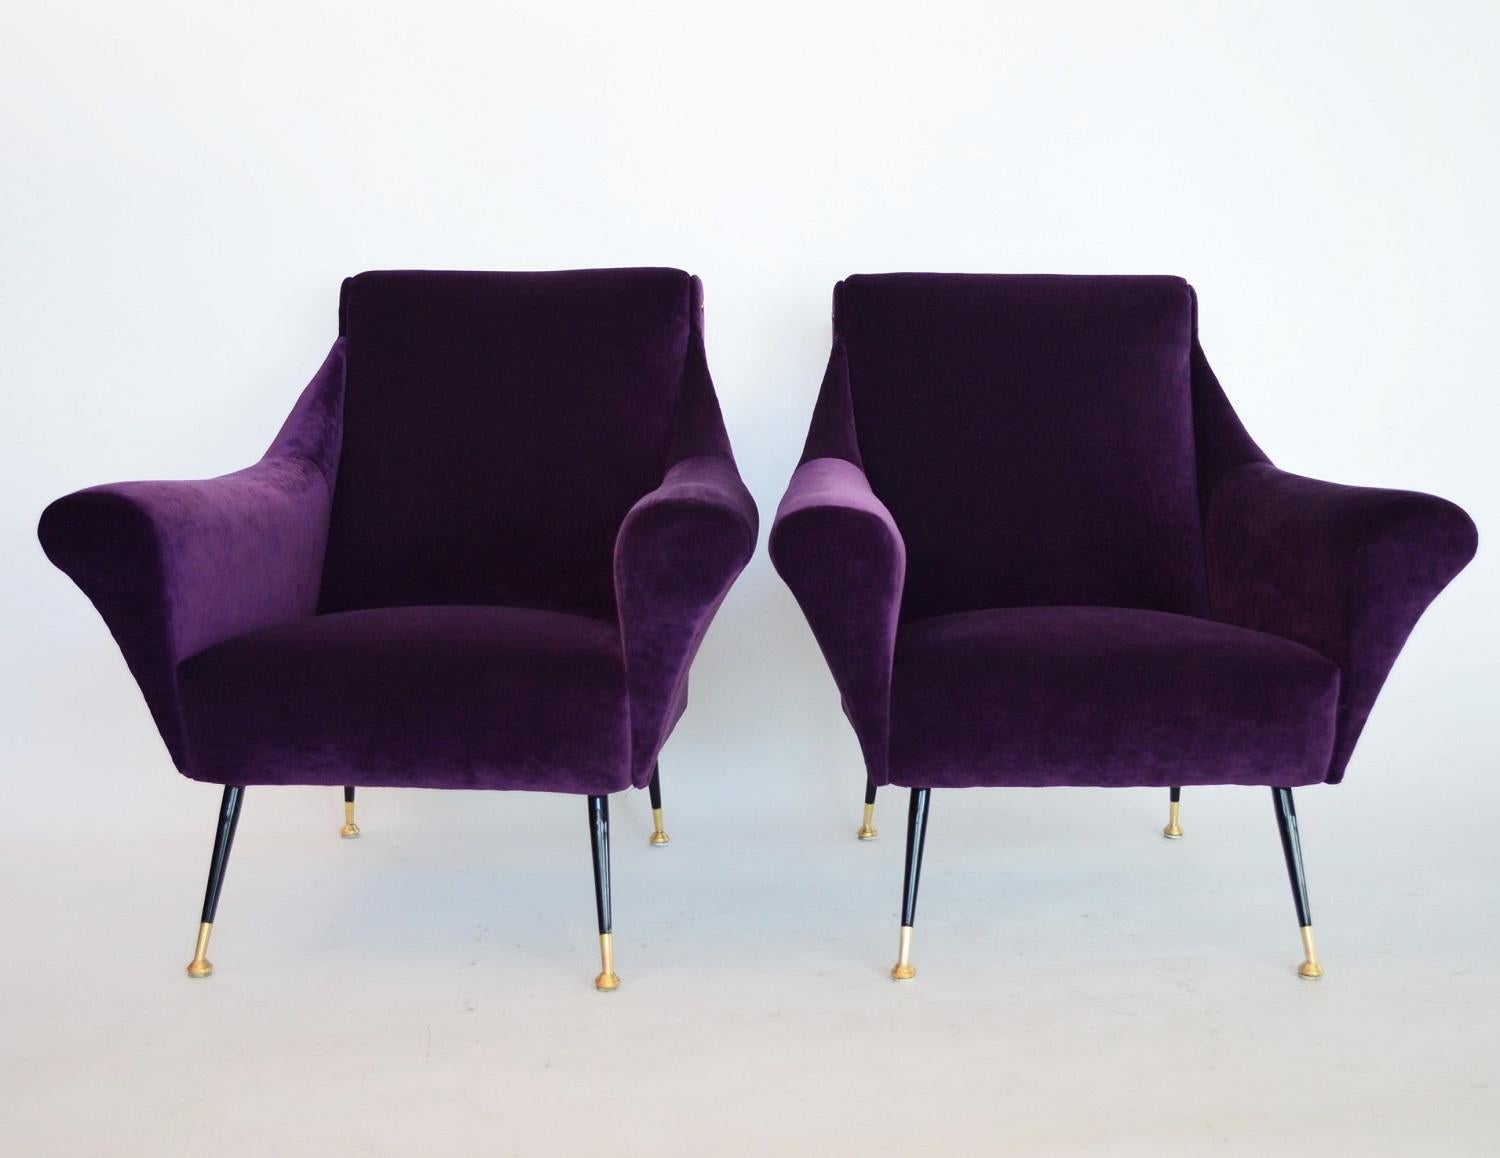 Elegant and beautiful pair of two Italian original armchairs or lounge chairs from the 1950s with brass feet and details.
Completely restored internally with quality material and outside reupholstered with purple Italian velvet.
The stiletto feet